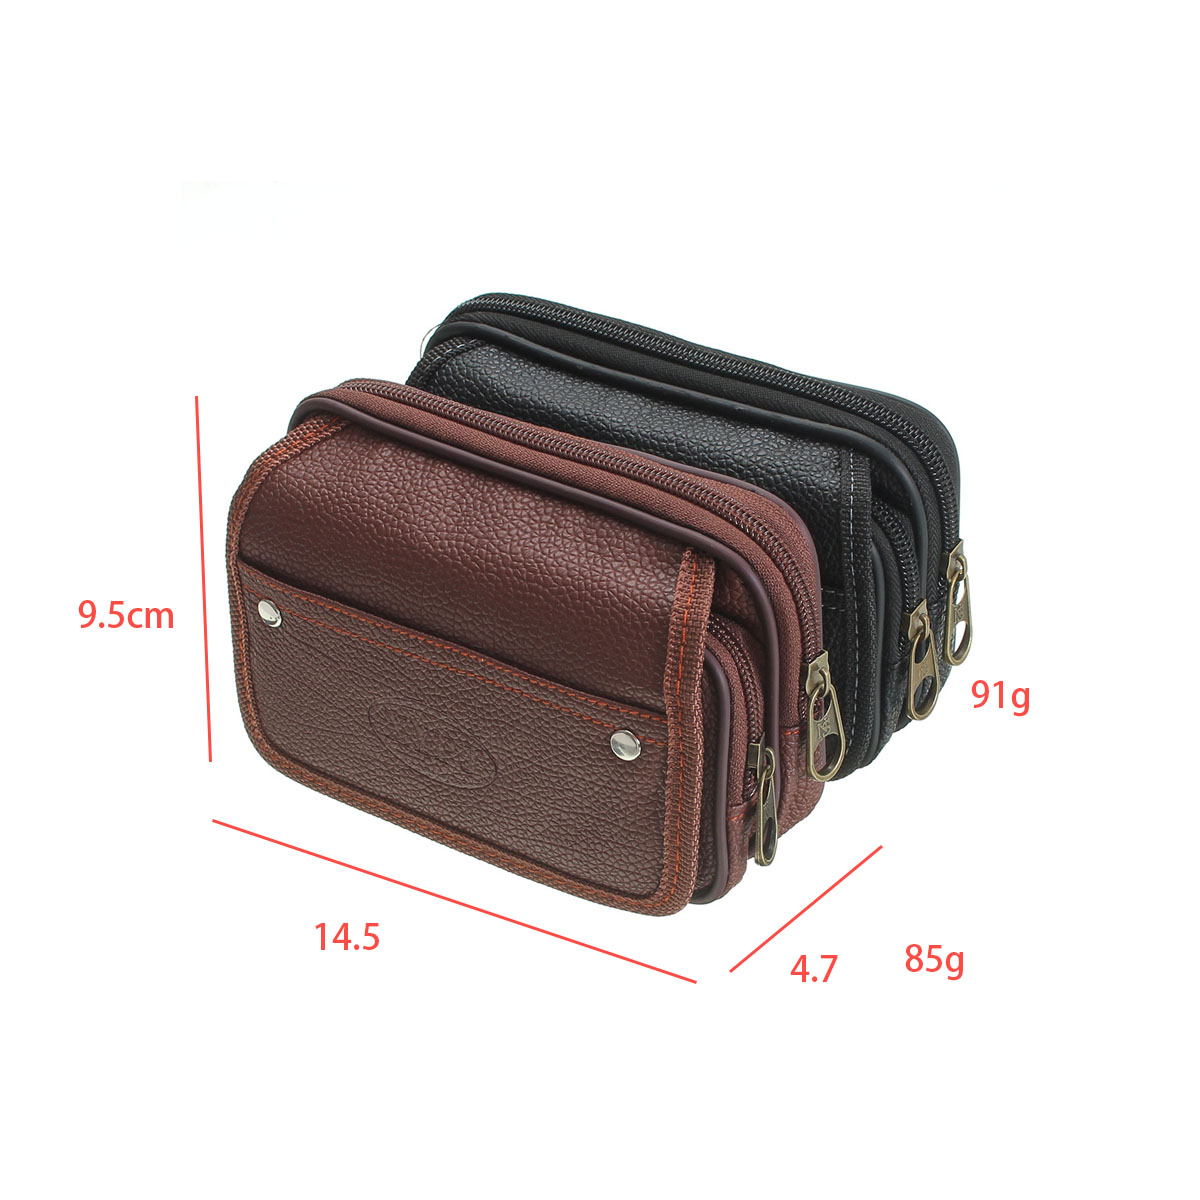 PU-Leather-Waist-Belt-Bag-Phone-Bag-Running-Wallet-Hip-Purse-Tote-Outdoor-Sports-Travel-Camping-1085218-2